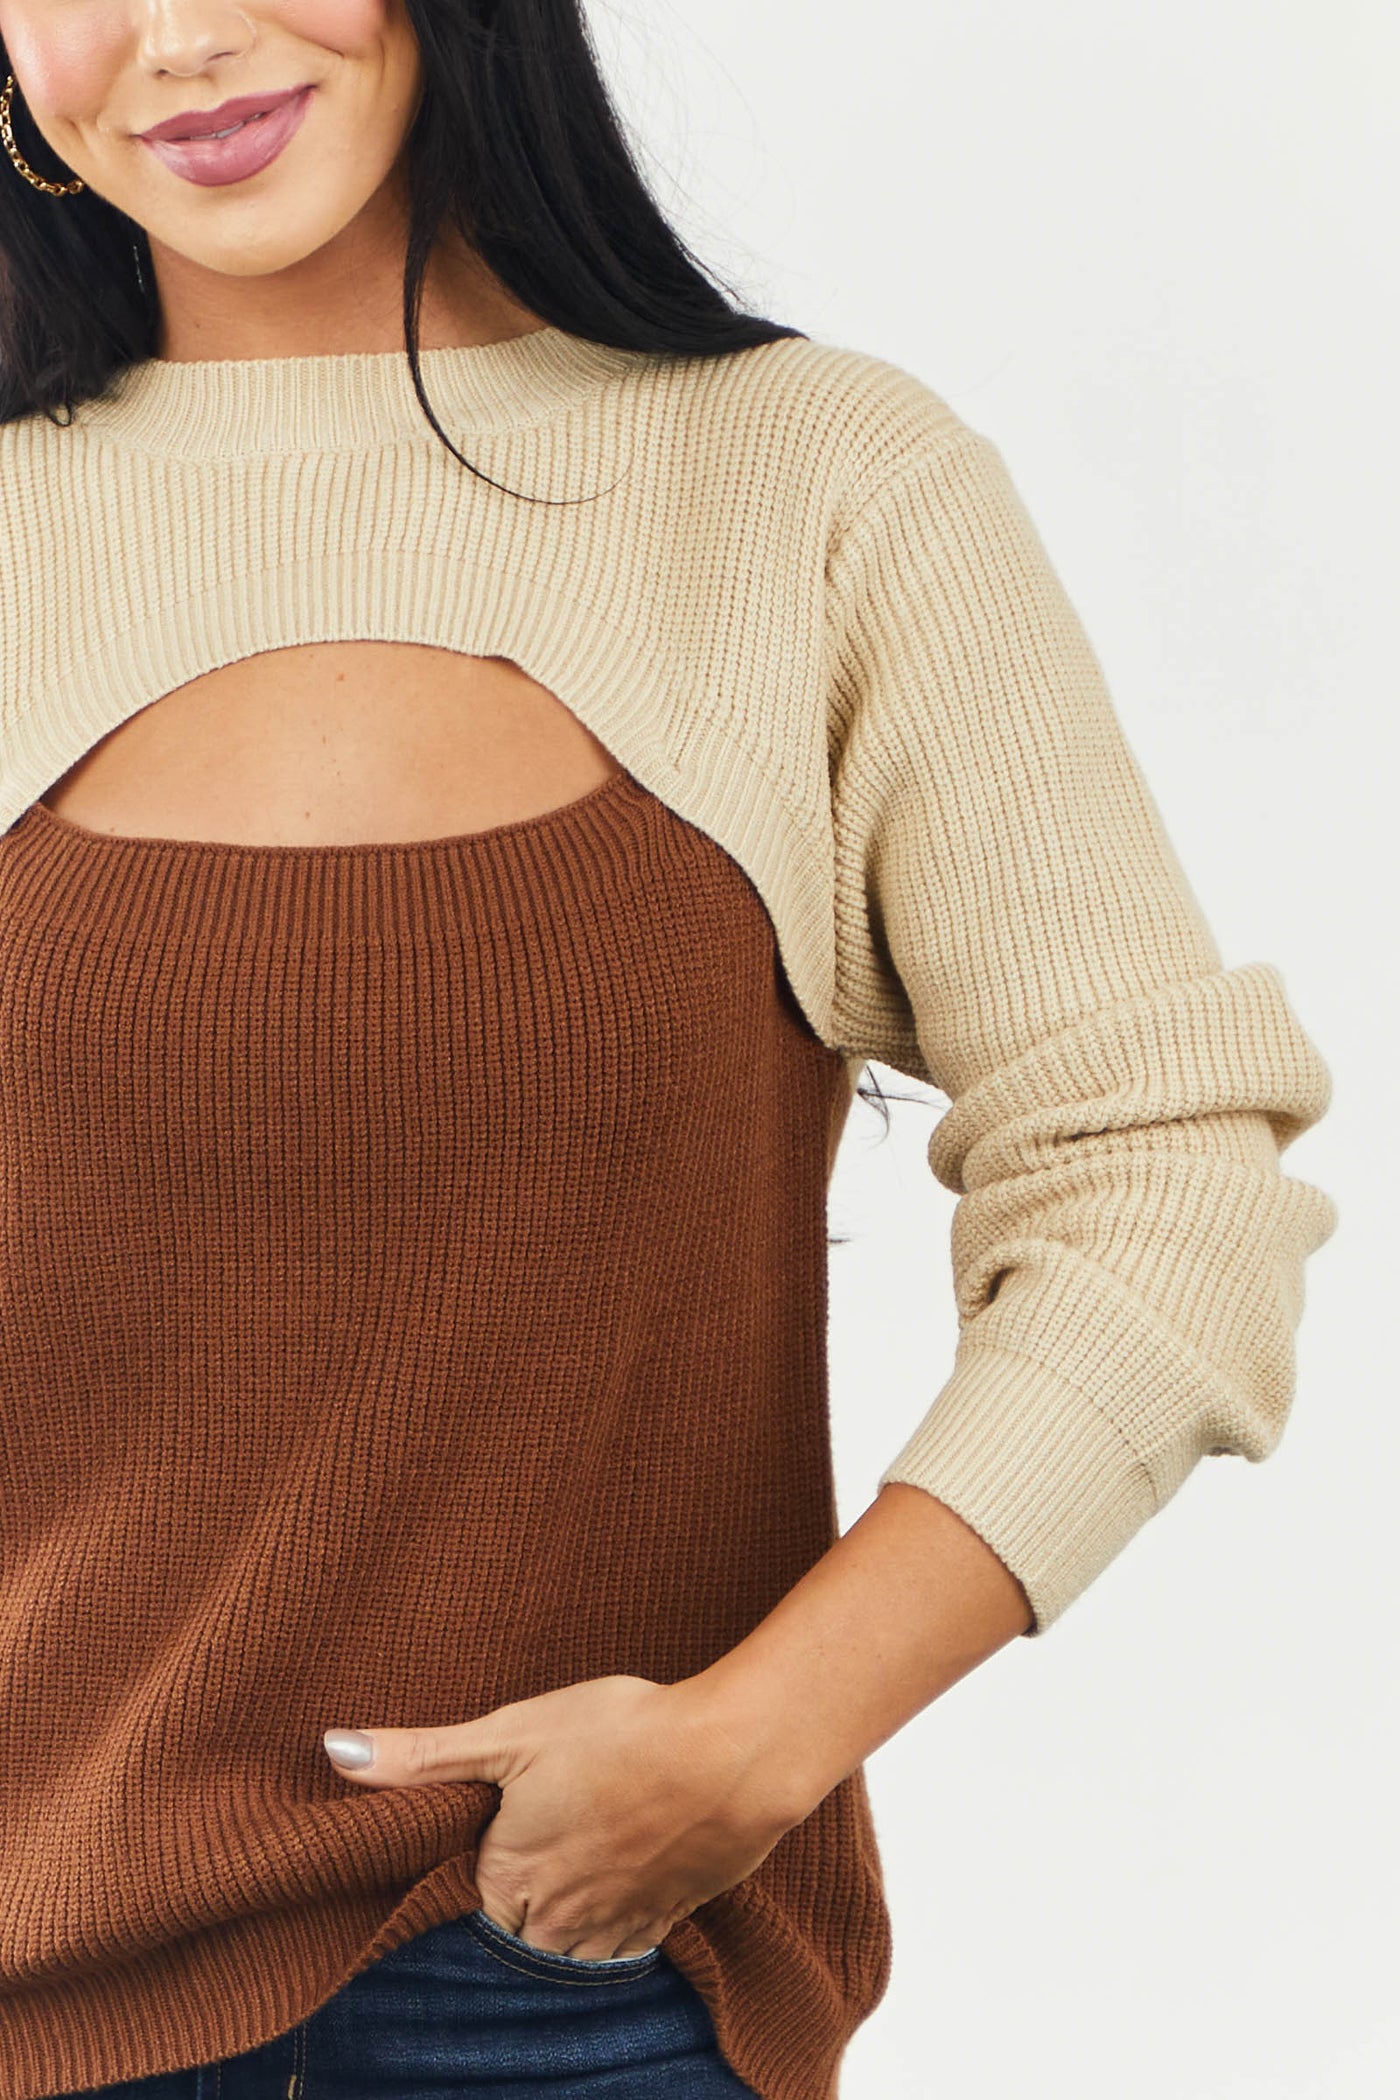 Sepia and Camel Colorblock Front Cut Out Sweater